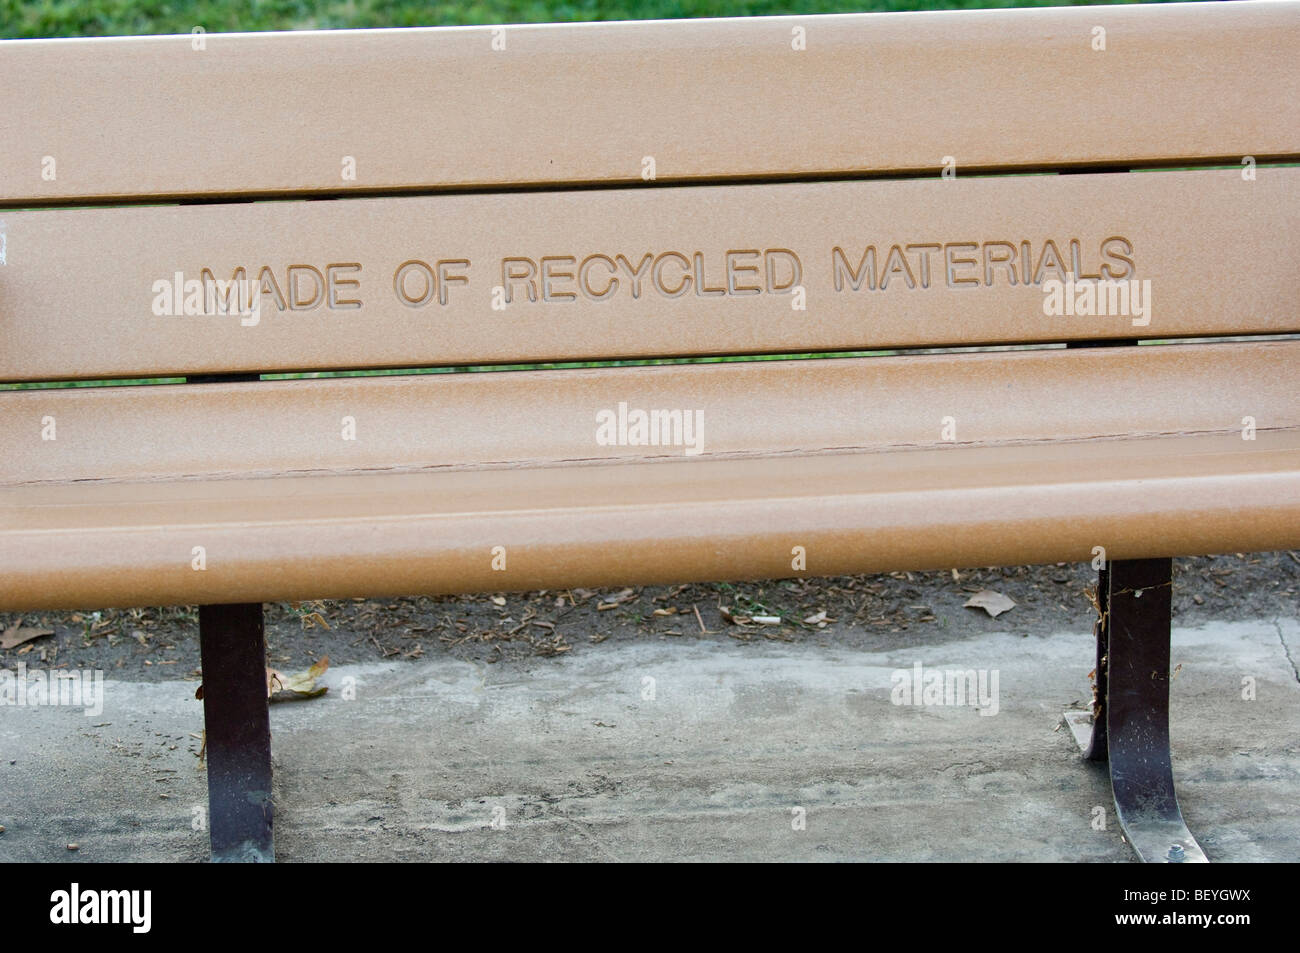 Park bench with a prominently displayed message indicating that it is manufactured with recycled materials. Stock Photo